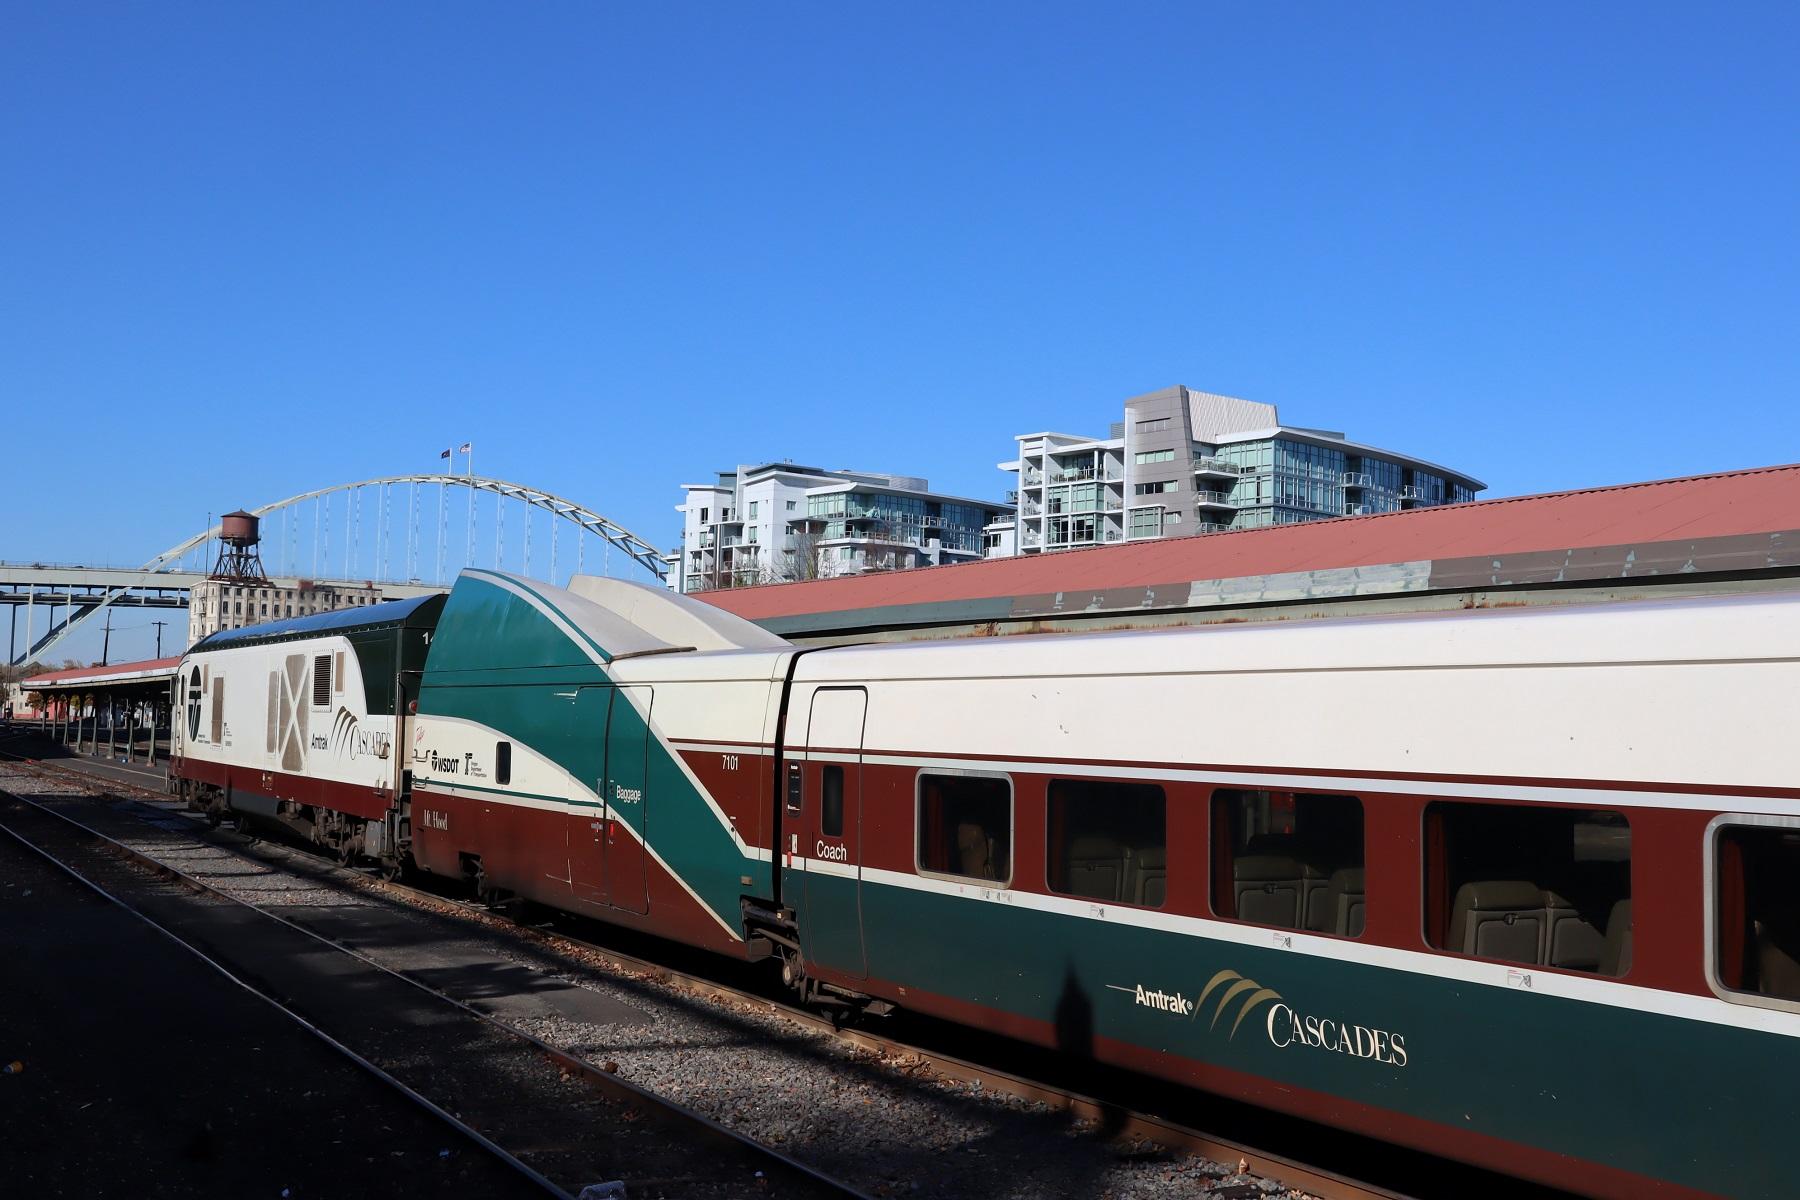 Plans To Beef Up Amtrak Cascades Service In 2020 Beset By Multiple  Uncertainties - OPB